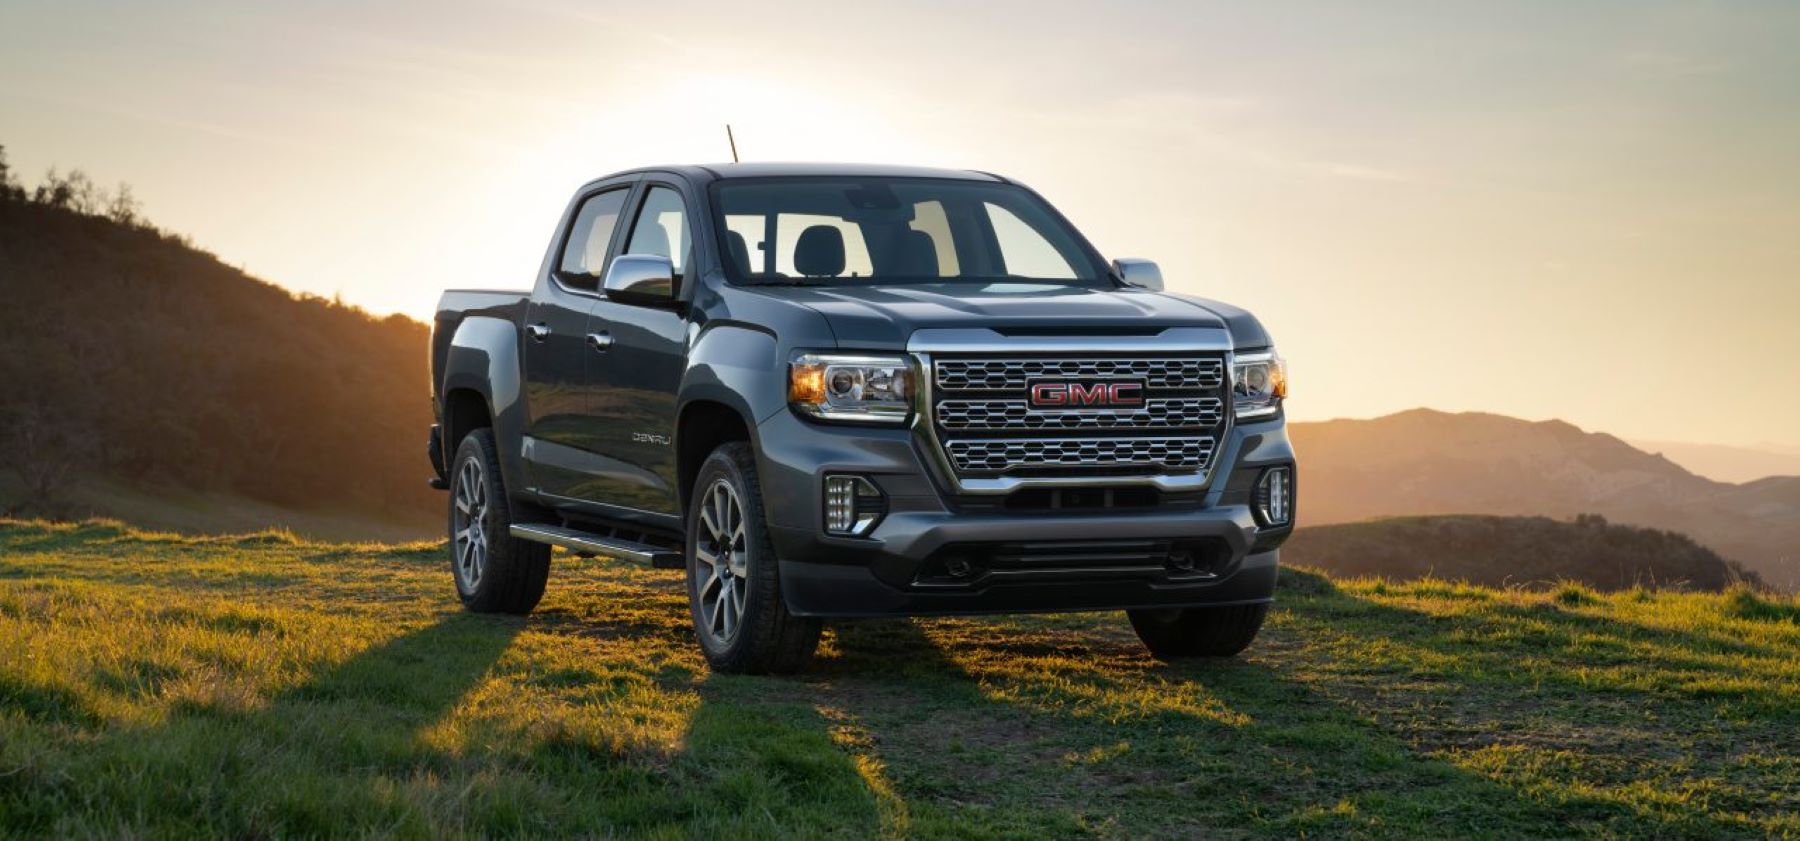 The 2022 GMC Canyon midsize pickup truck parked on a grass field as the sun sets on rolling hills